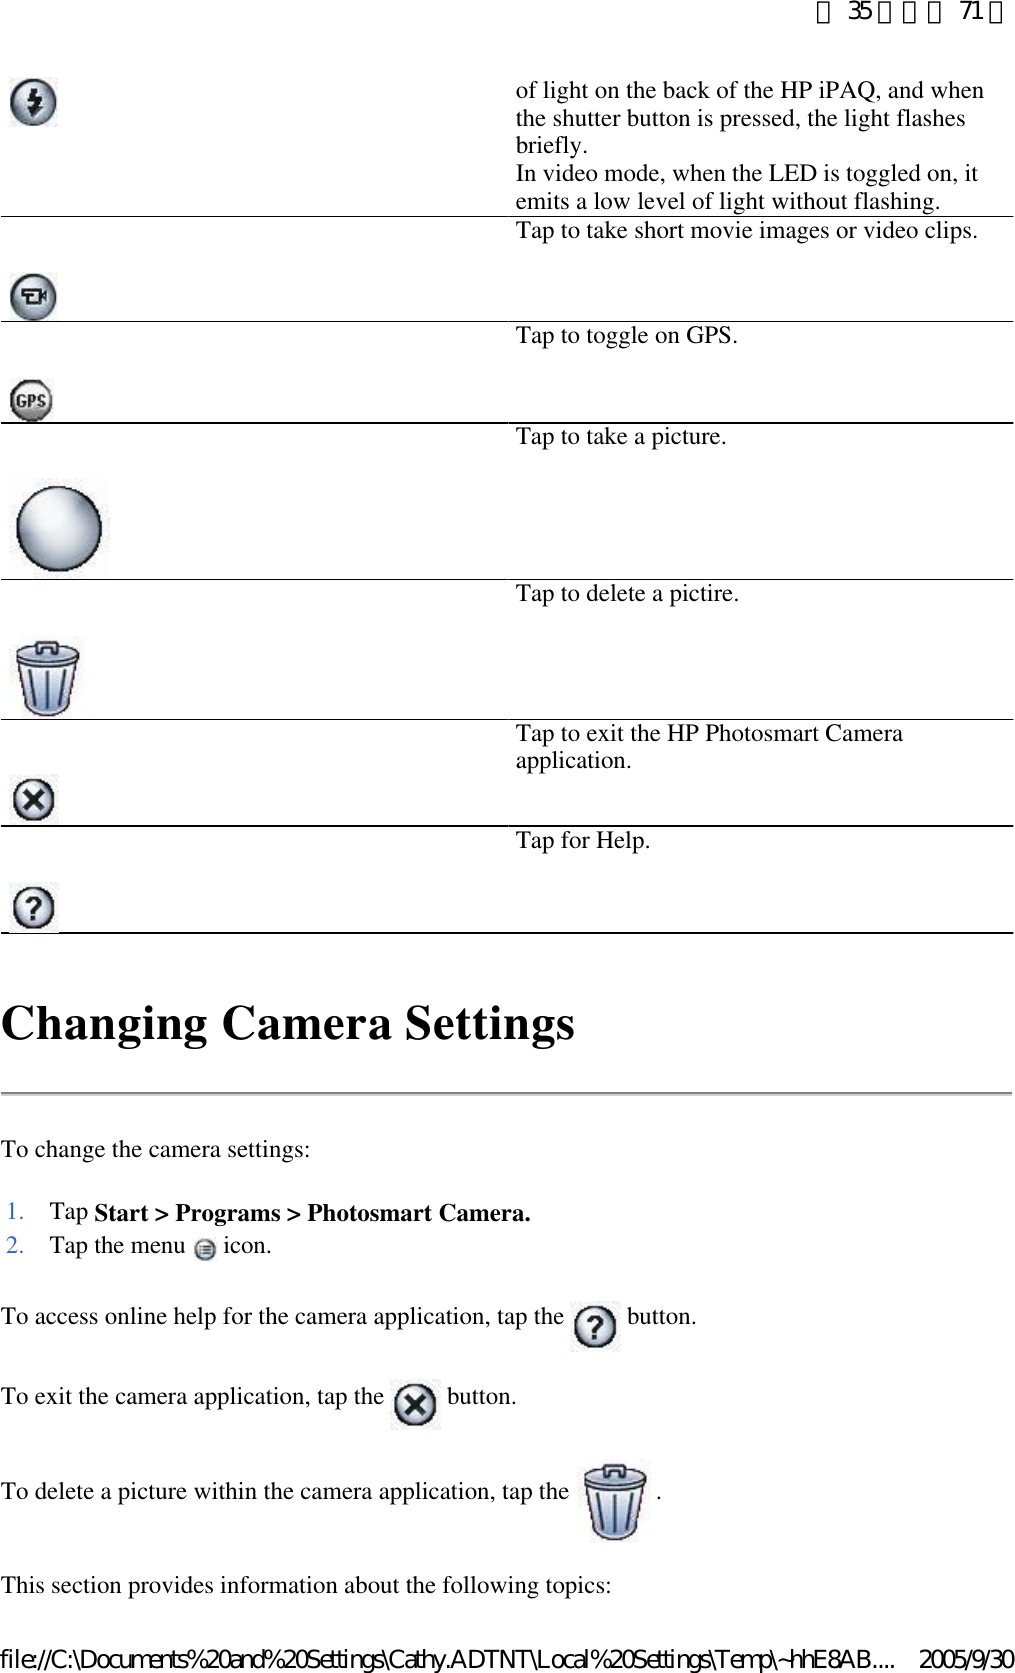 Changing Camera Settings To change the camera settings: To access online help for the camera application, tap the   button.  To exit the camera application, tap the   button.  To delete a picture within the camera application, tap the  .  This section provides information about the following topics:  of light on the back of the HP iPAQ, and when the shutter button is pressed, the light flashes briefly. In video mode, when the LED is toggled on, it emits a low level of light without flashing.   Tap to take short movie images or video clips.   Tap to toggle on GPS.   Tap to take a picture.   Tap to delete a pictire.   Tap to exit the HP Photosmart Camera application.   Tap for Help. 1. Tap Start &gt; Programs &gt; Photosmart Camera.2. Tap the menu   icon. 第 35 頁，共 71 頁2005/9/30file://C:\Documents%20and%20Settings\Cathy.ADTNT\Local%20Settings\Temp\~hhE8AB....